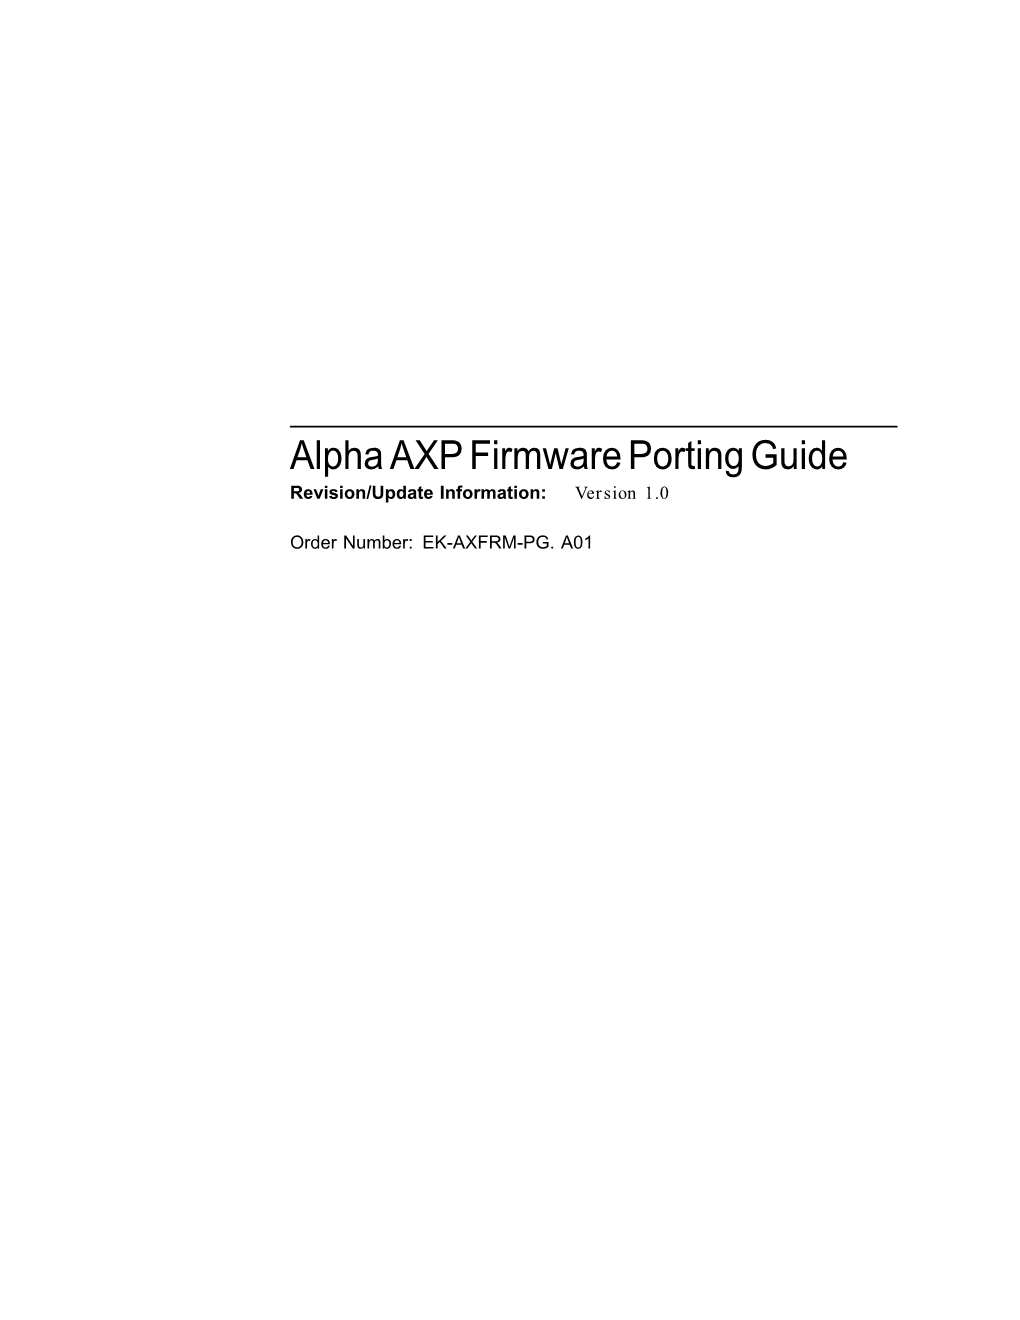 Alpha AXP Firmware Porting Guide Revision/Update Information: Version 1.0